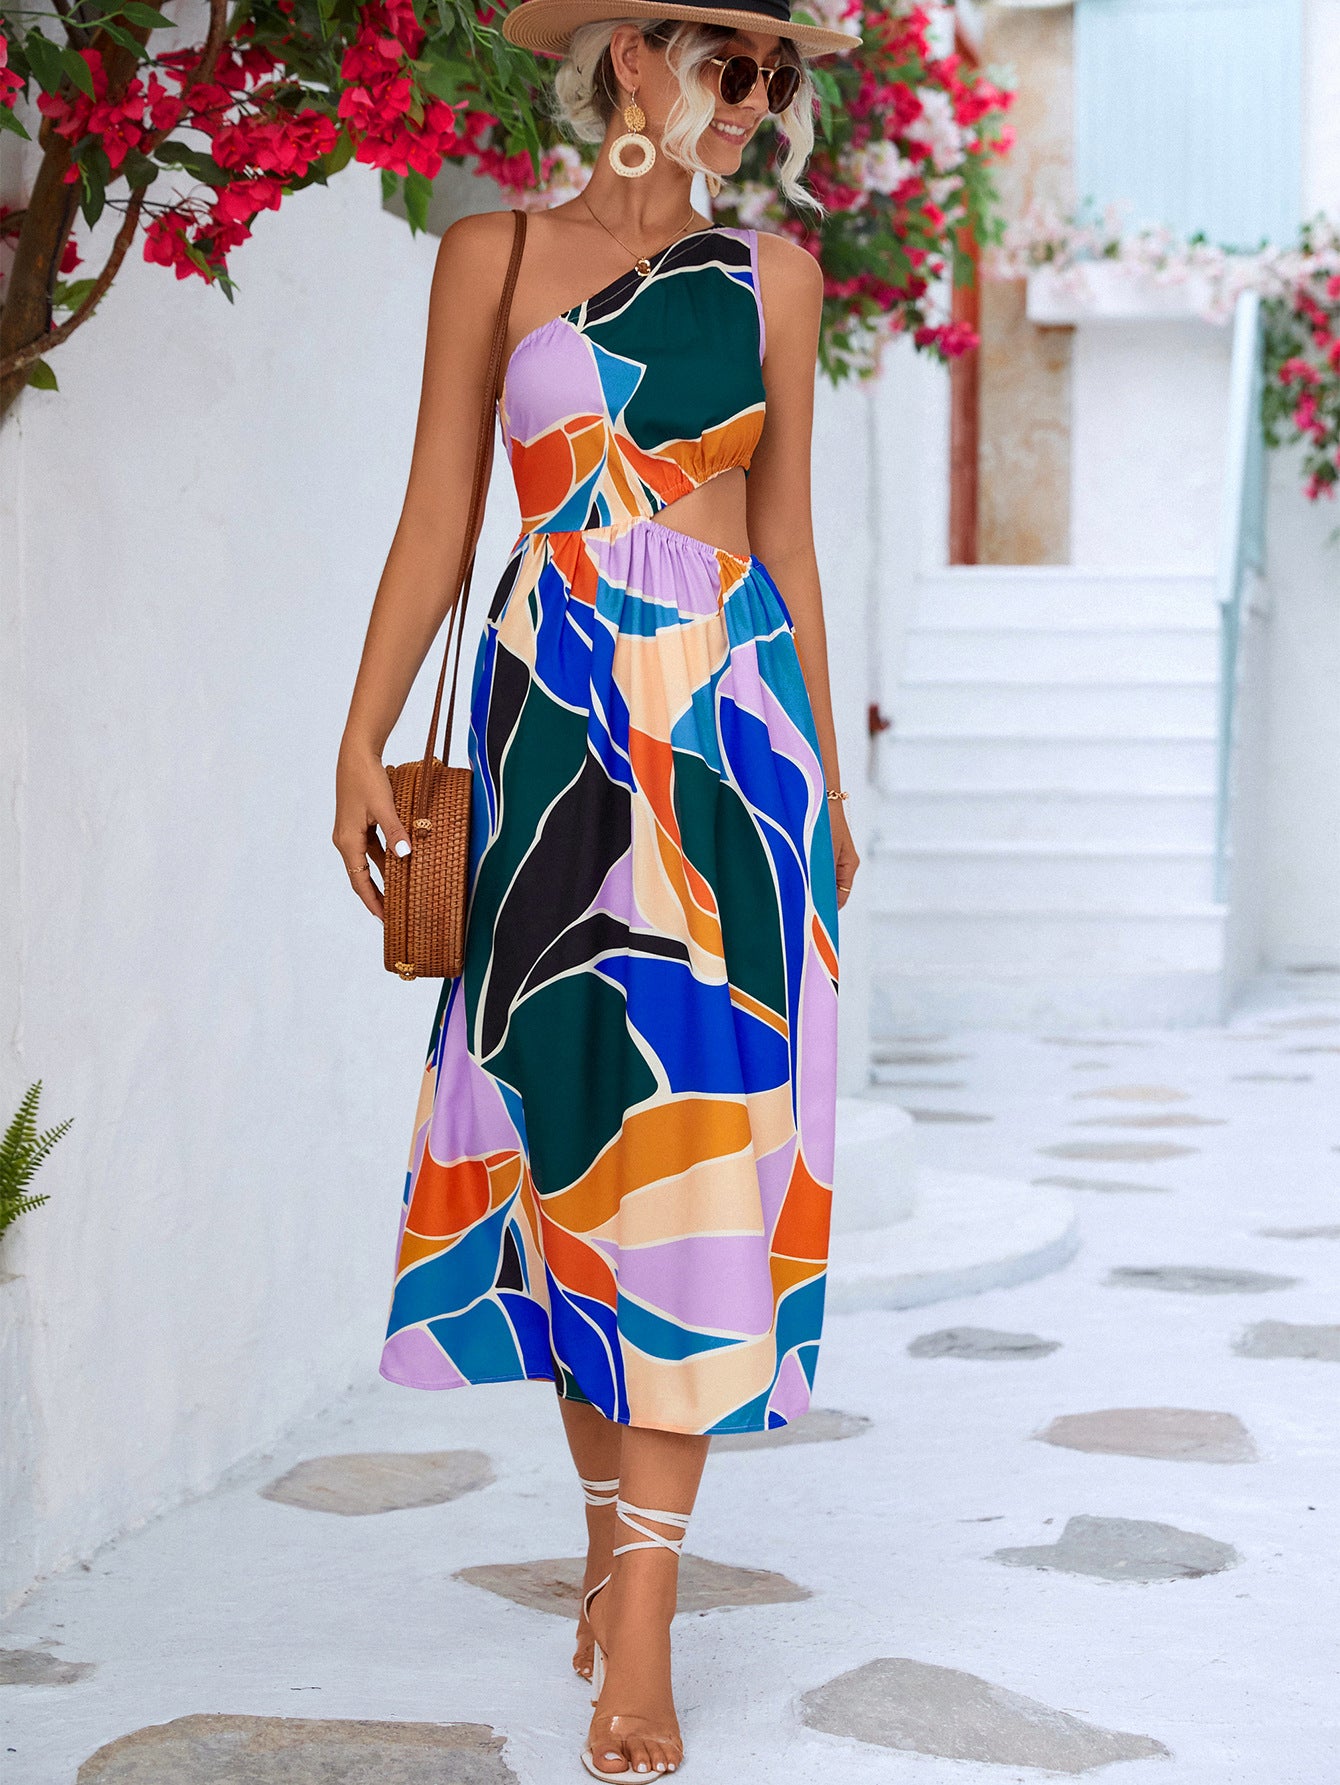 This one-shoulder sleeveless dress features a cutout design at the waist and a midi length. Pair with a floral headband or choker to accentuate your neckline.